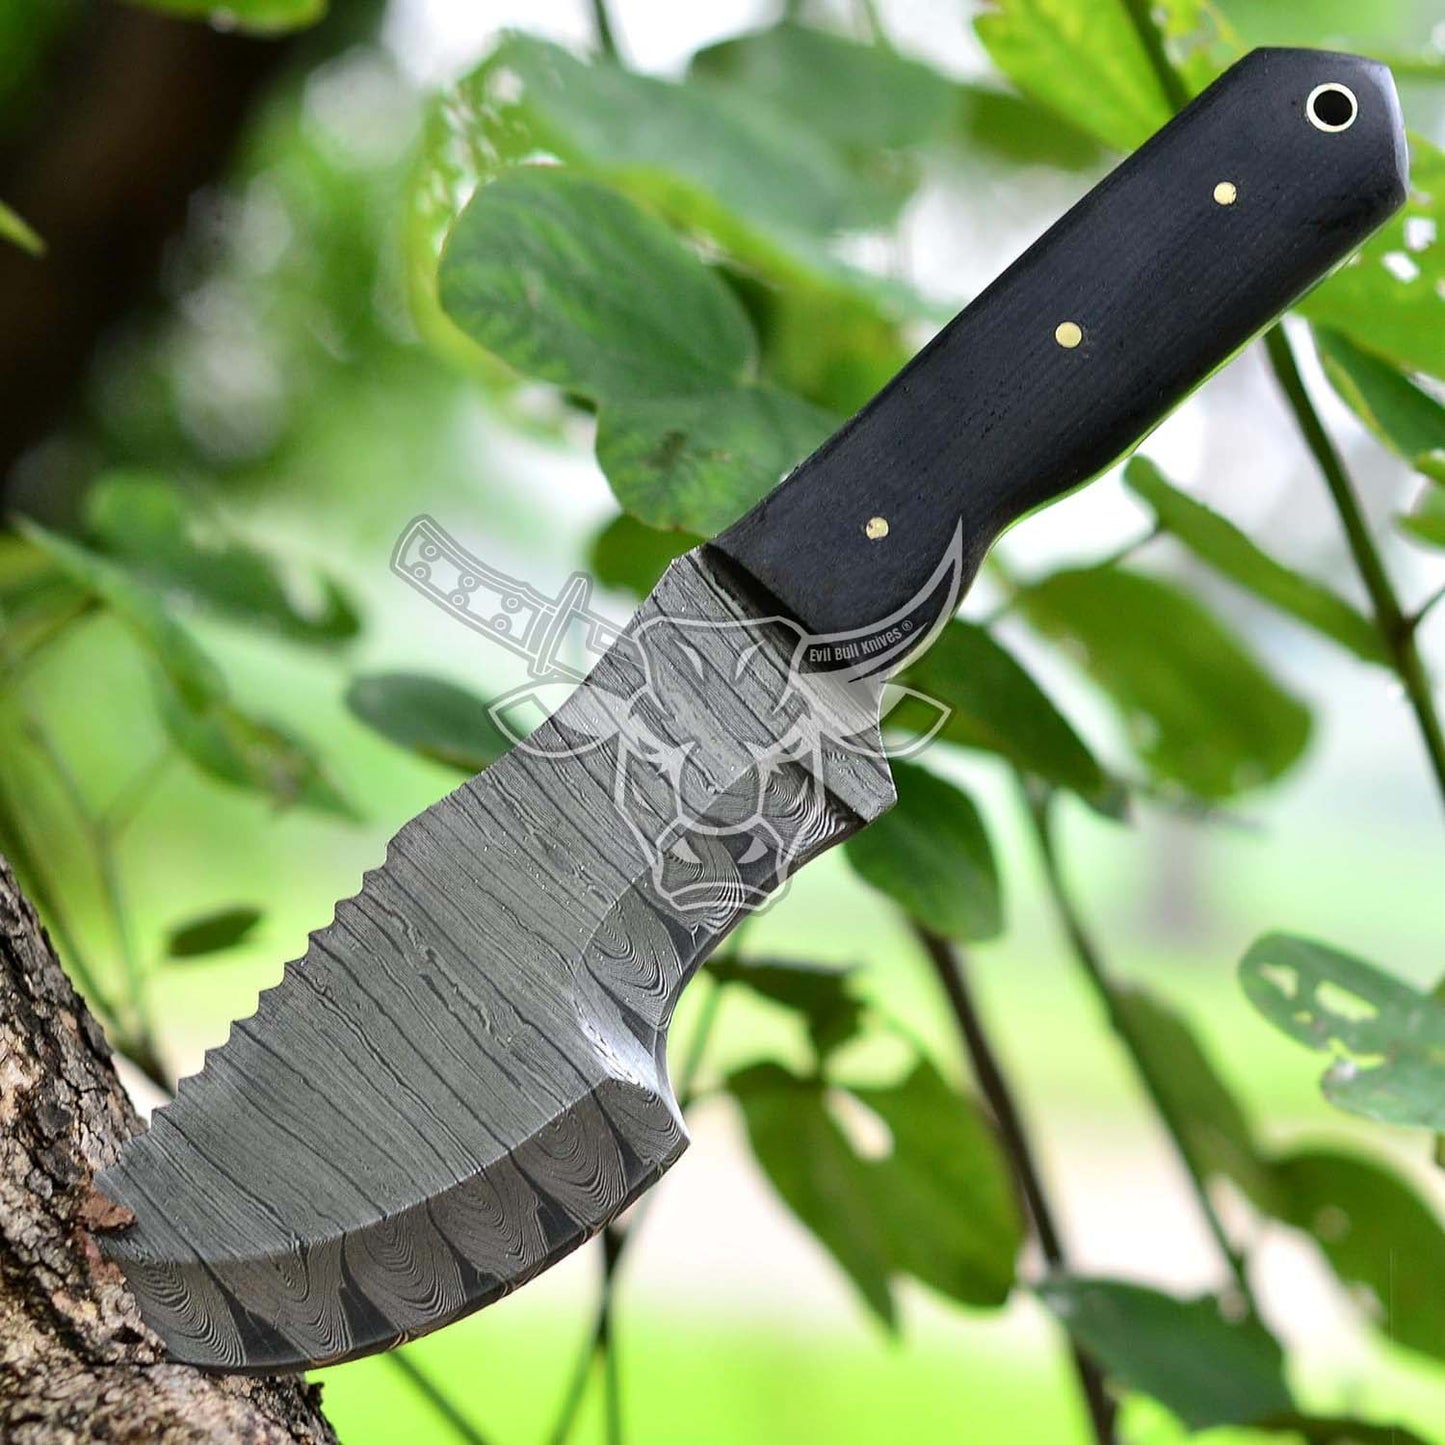 EBK-165 Custom Handmade DAMASCUS Tracker Knife With Micarta Handle And Awesome Leather Sheath Anniversary Gift , Groomsman Gift , Father Day GIFT, Christmas Gift For Him